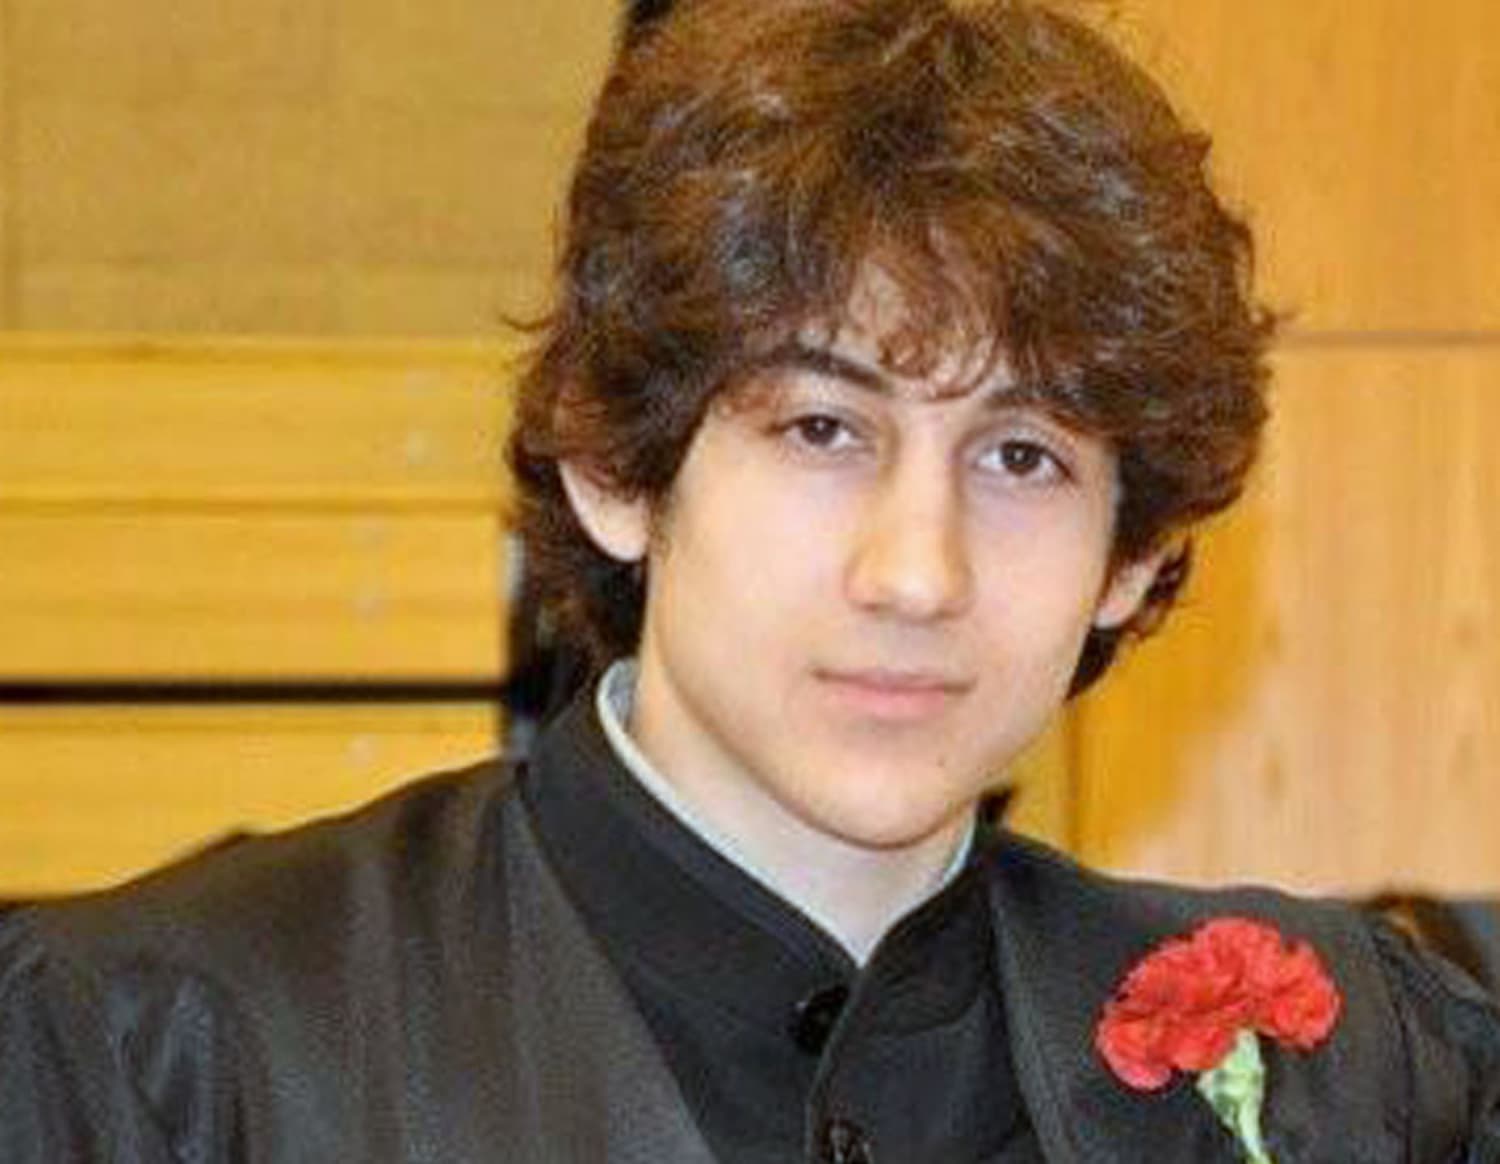 Russia Warned U.S. About Tsarnaev, But Spelling Issue Let Him.